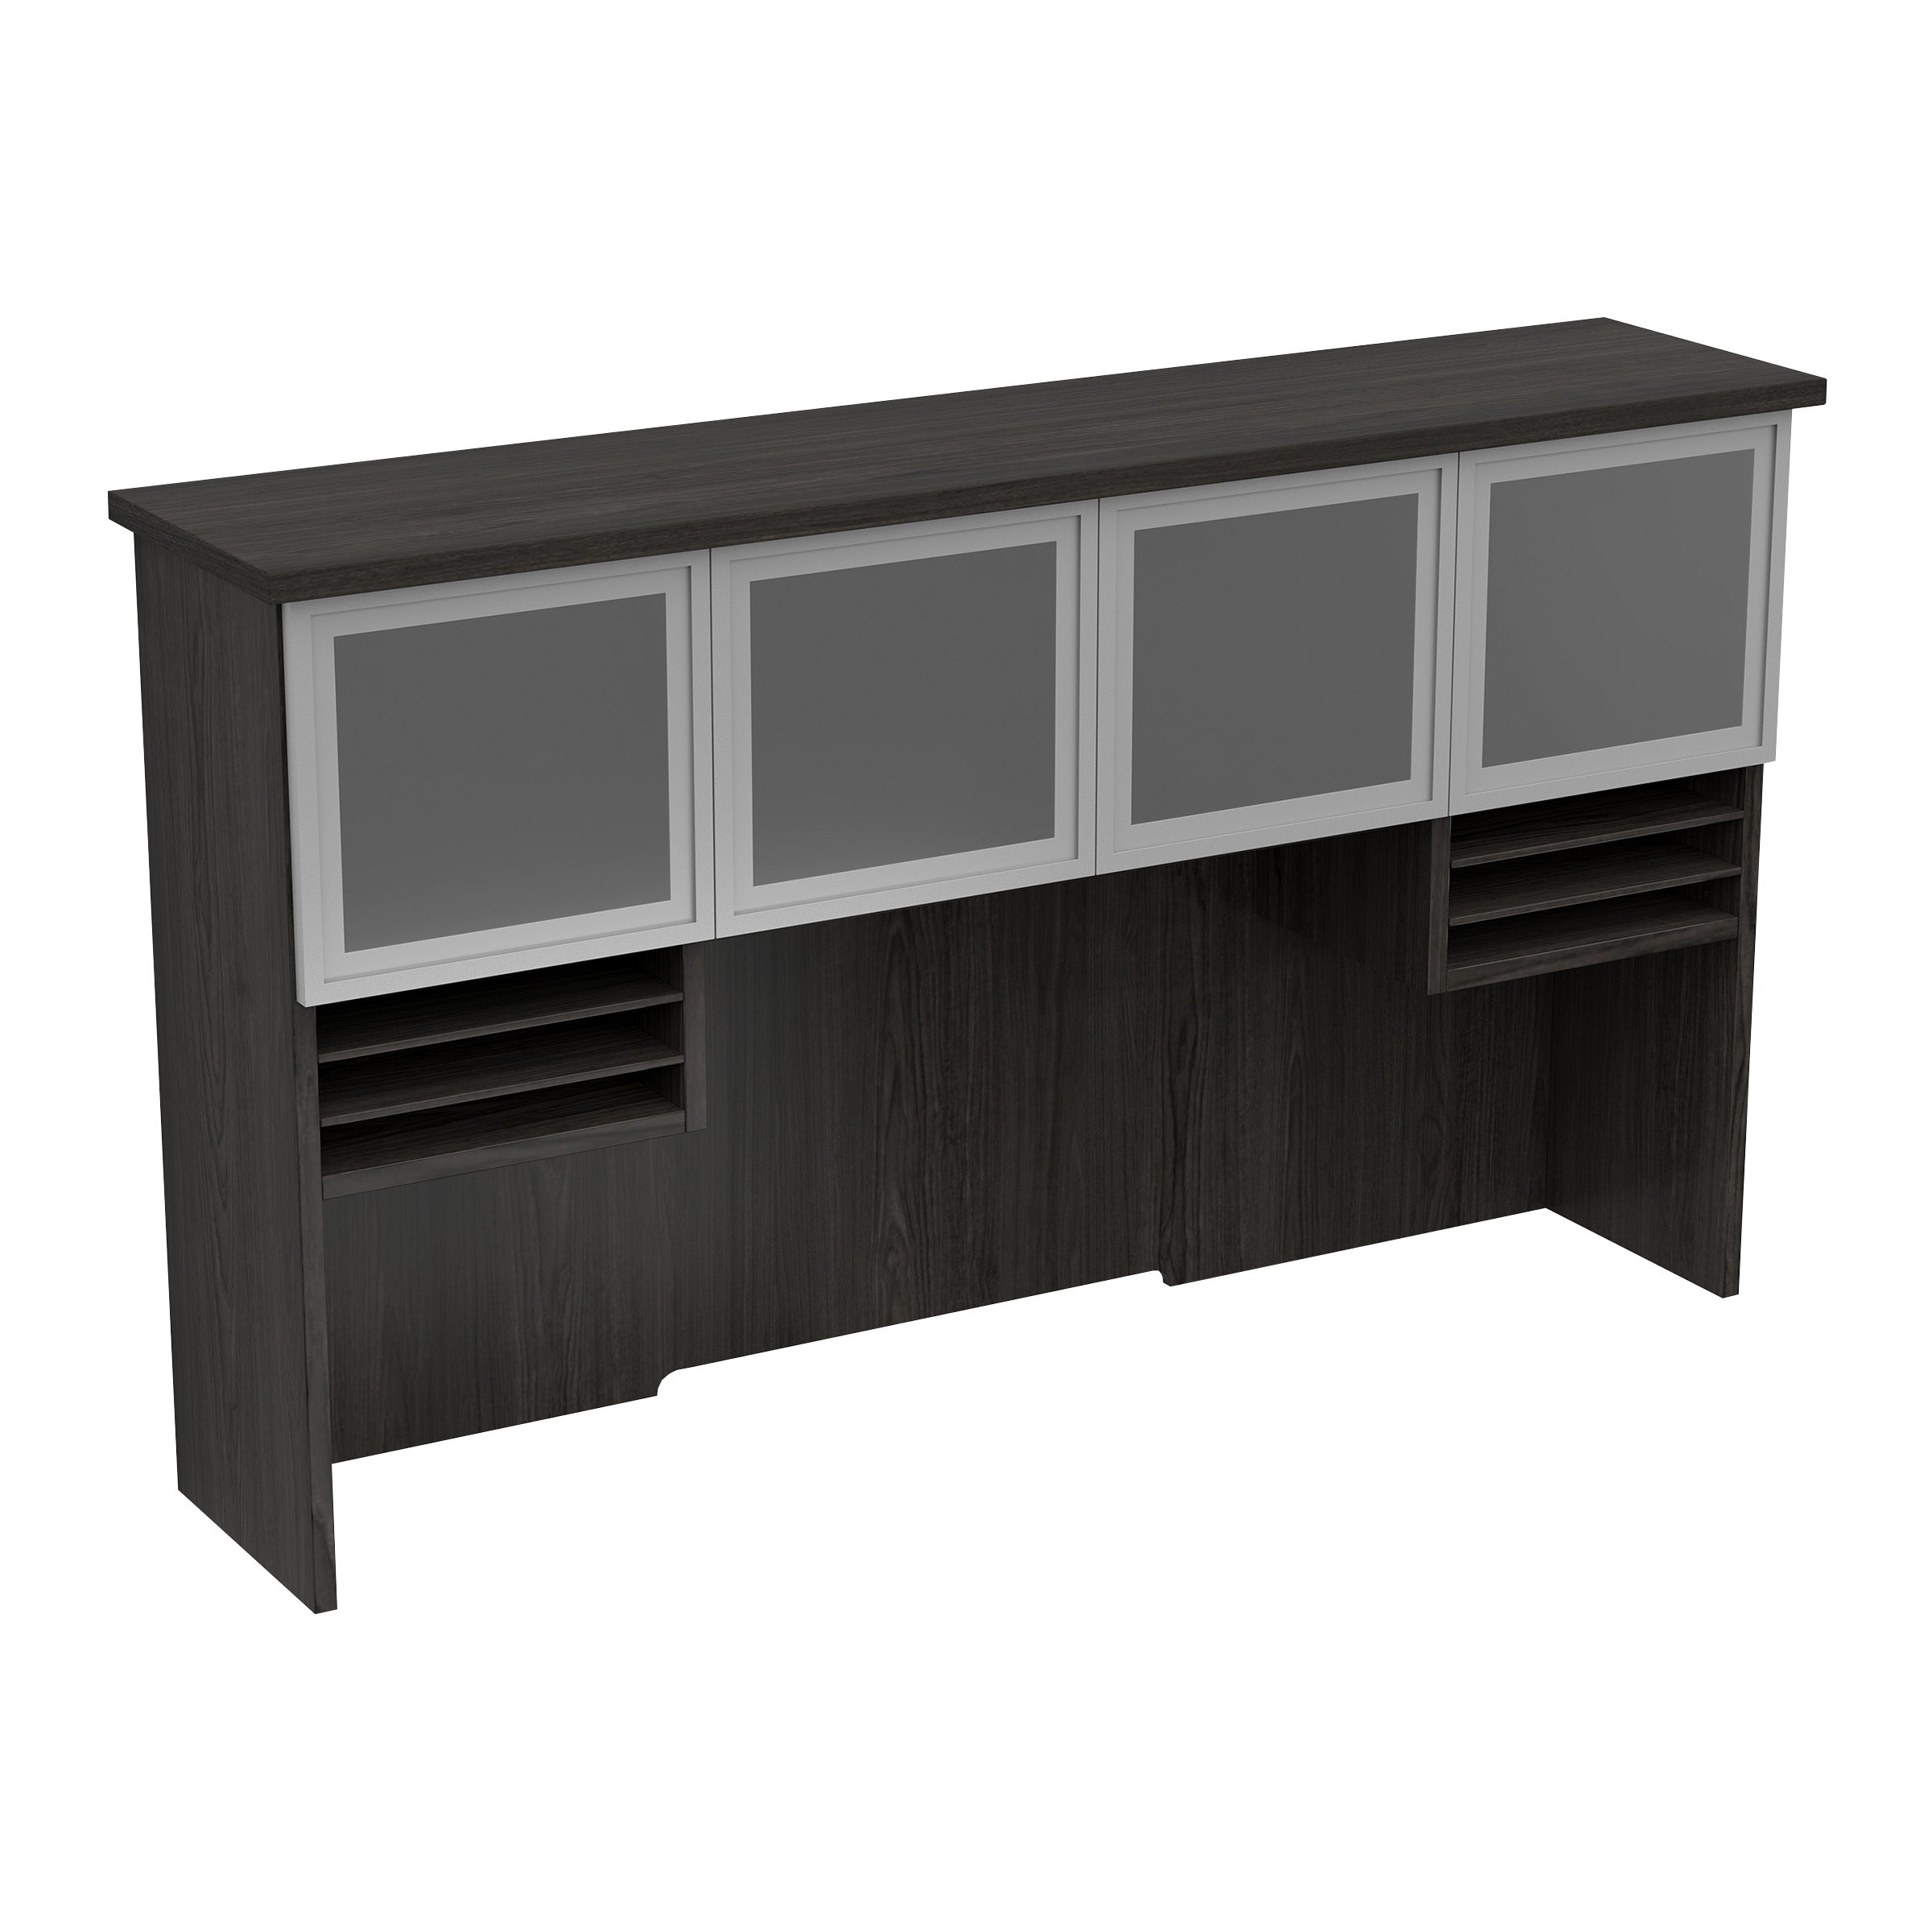 TUX-42 - Tuxedo Series Hutch with Glass Doors, by OSP